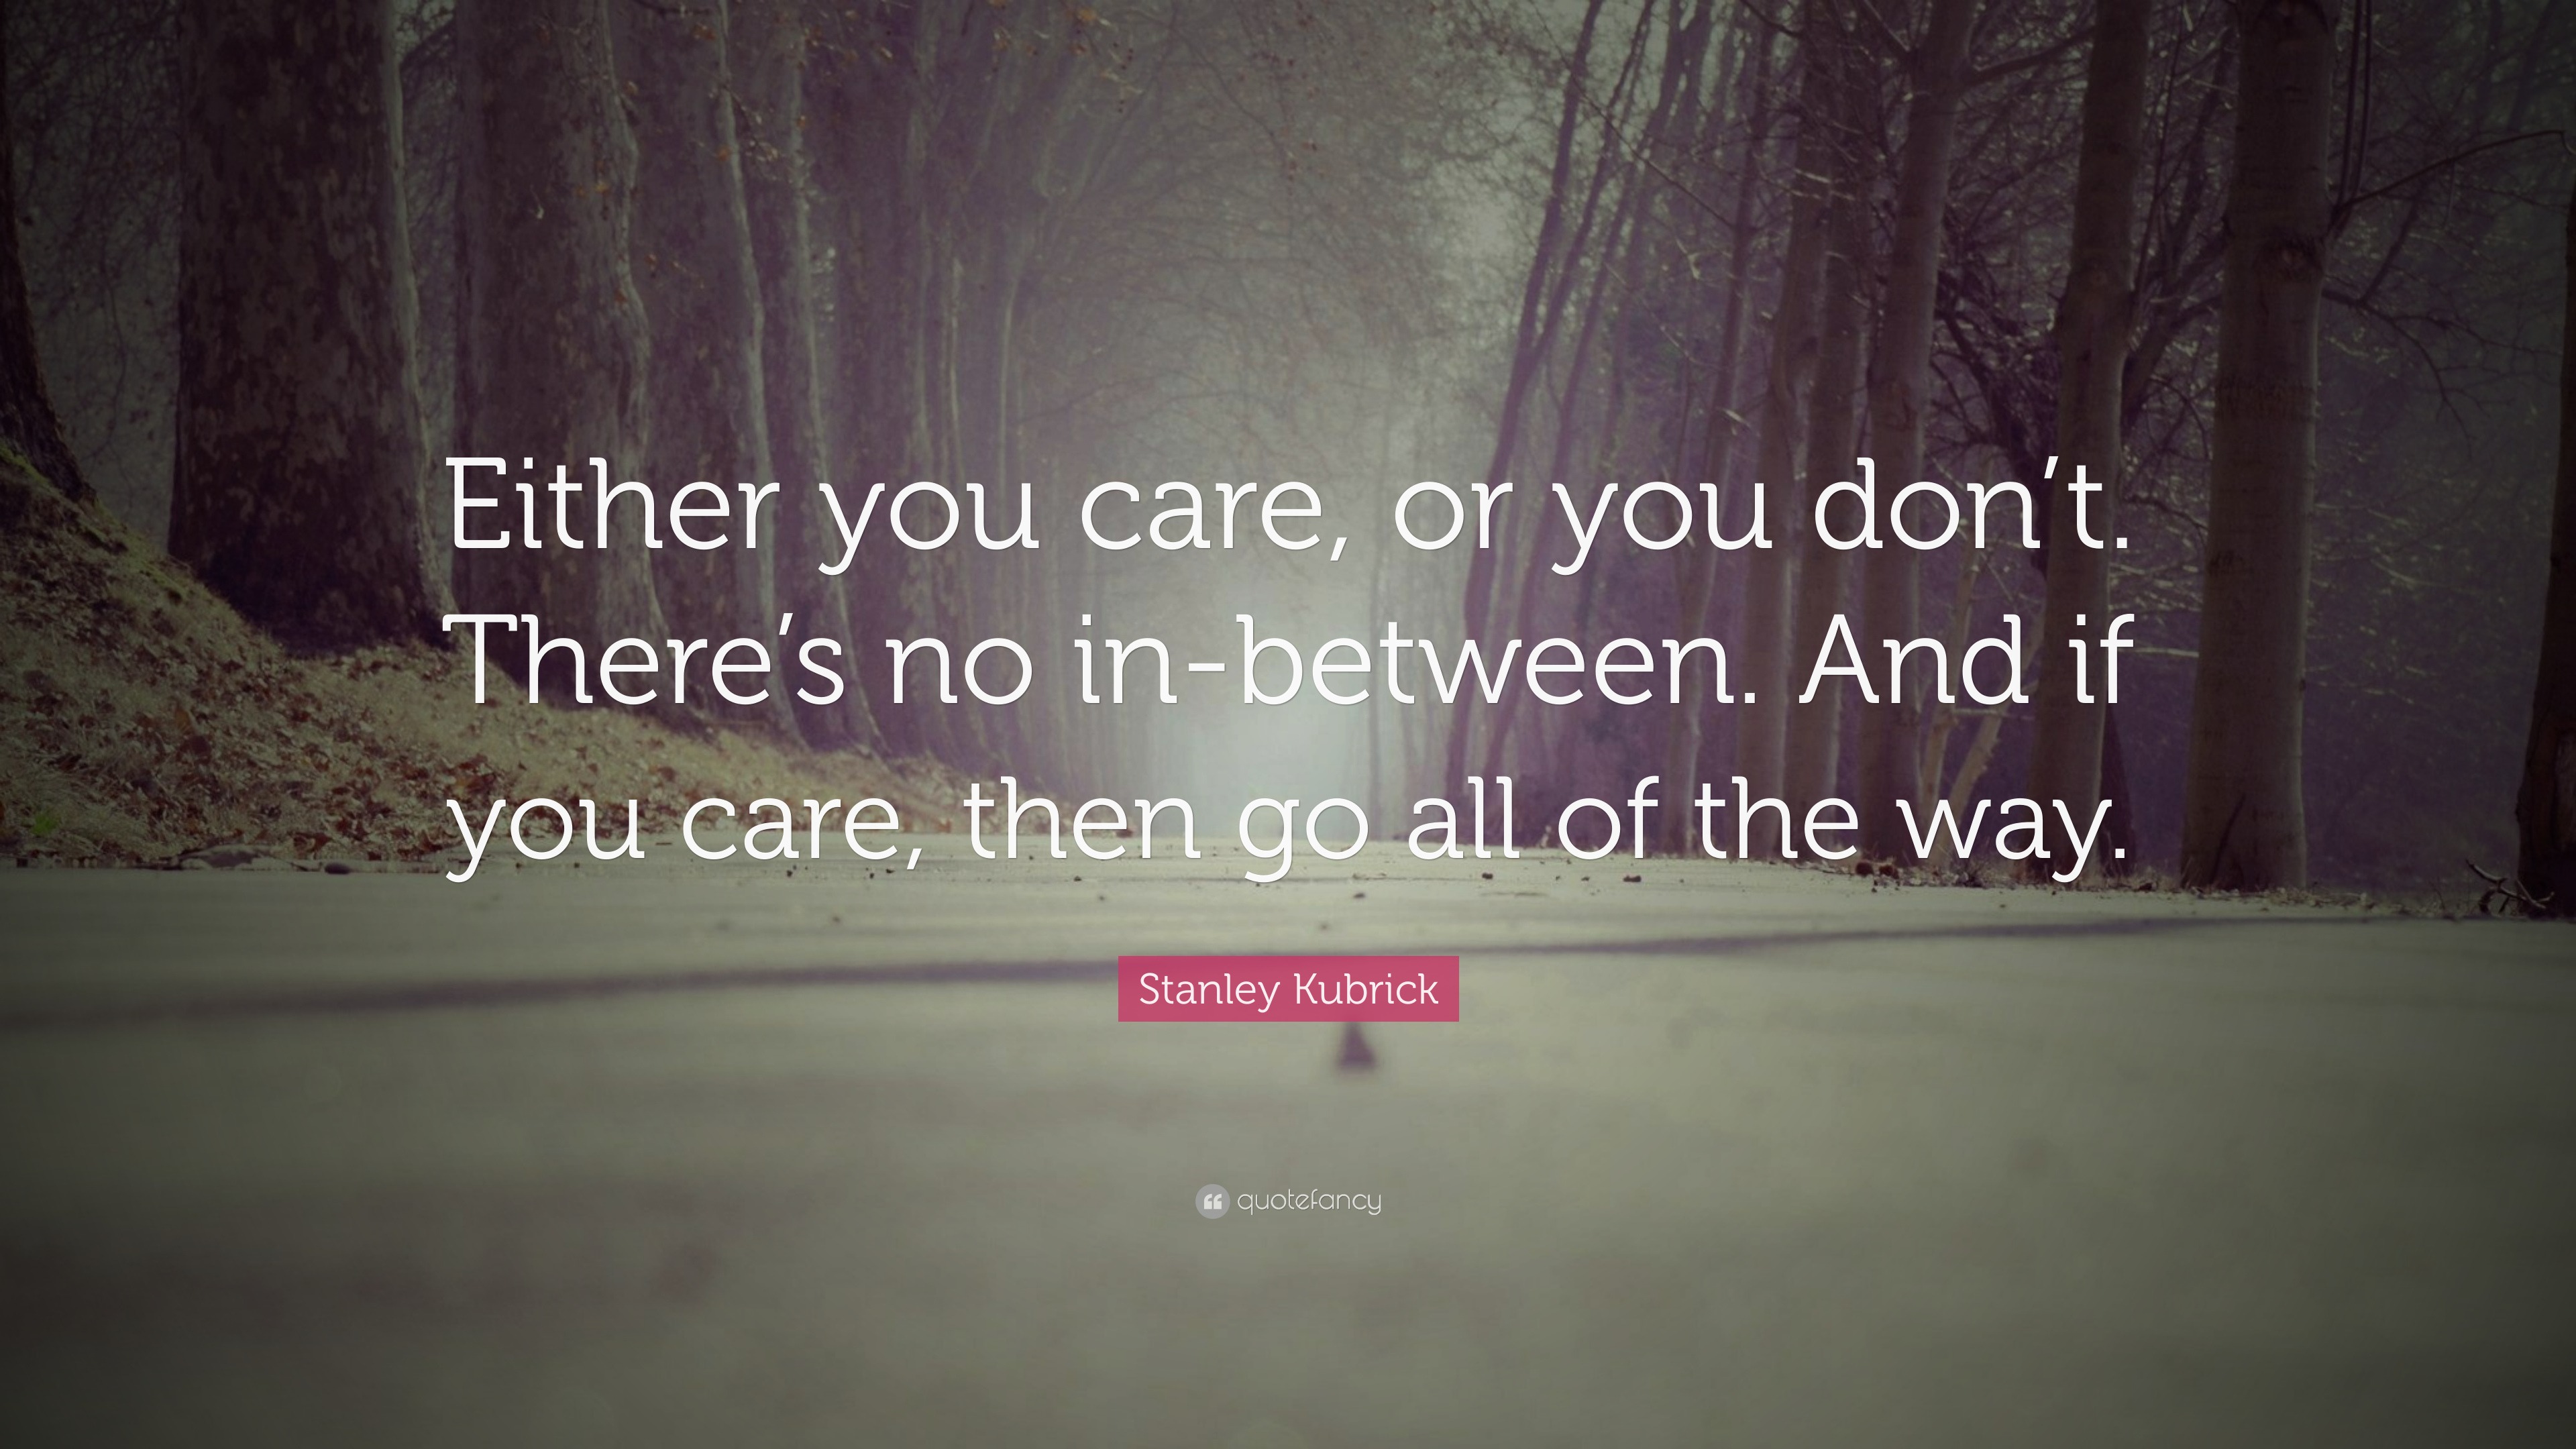 Stanley Kubrick Quote: “Either you care, or you don’t. There’s no in ...